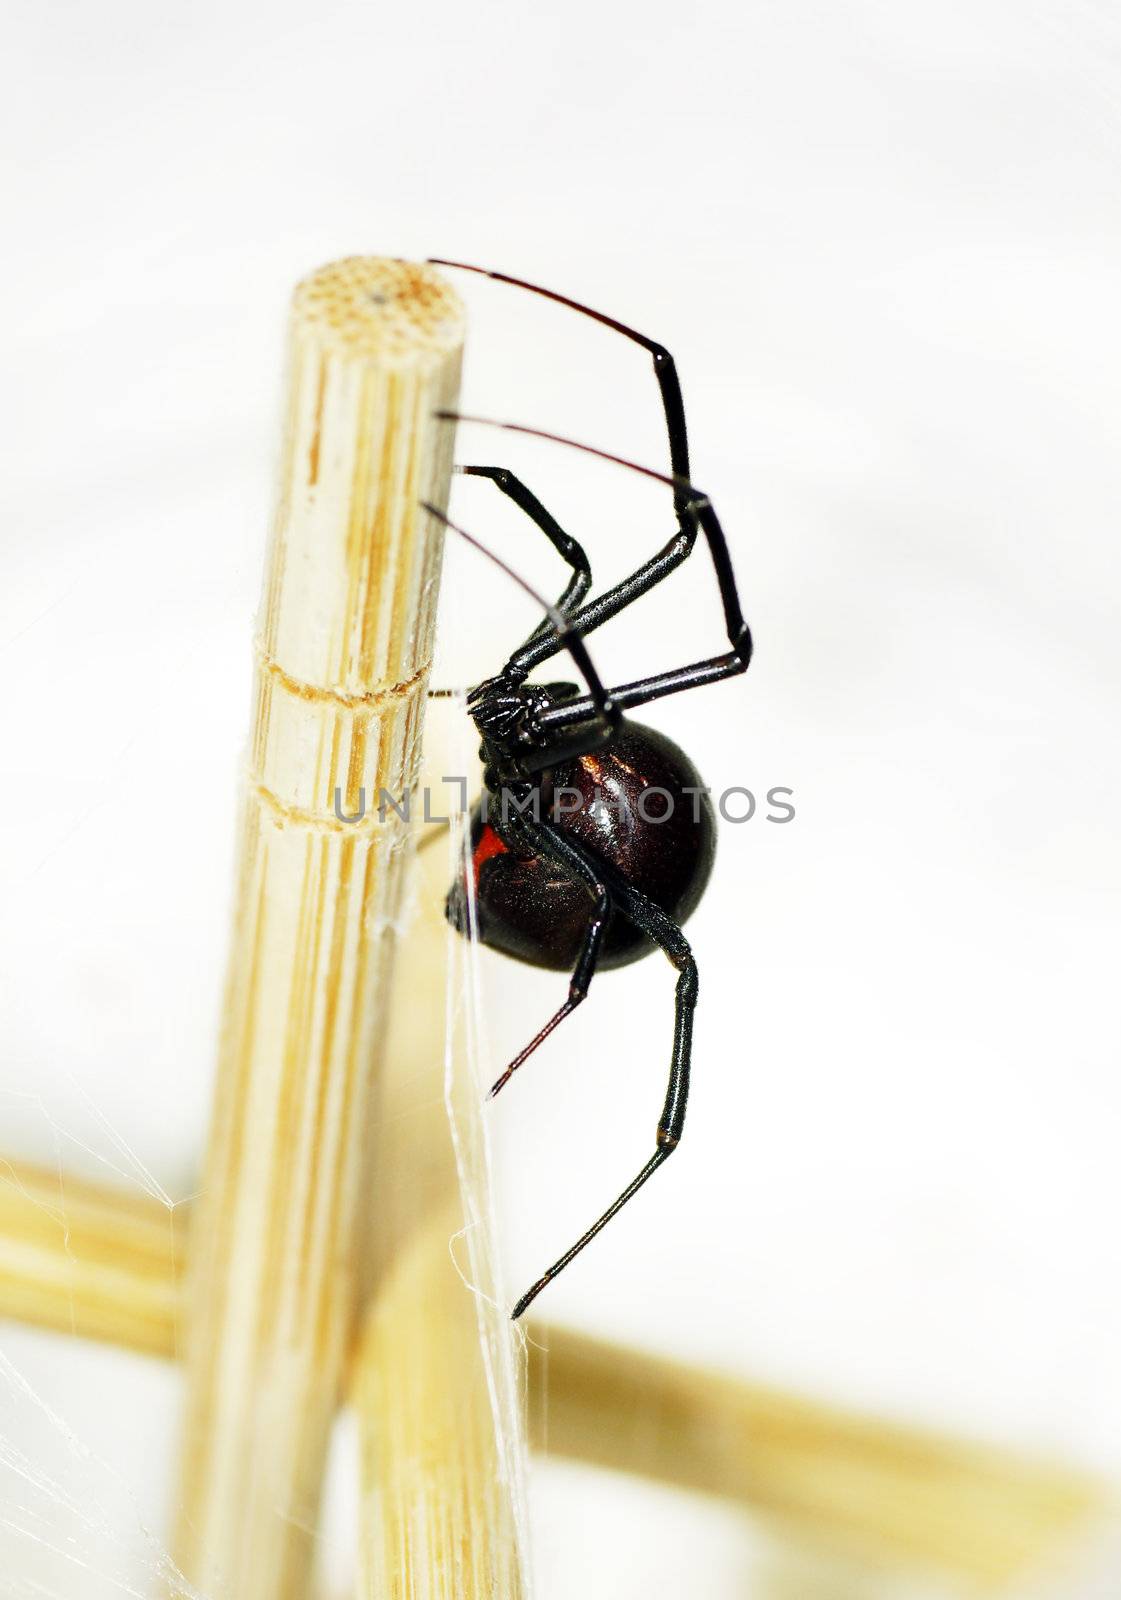 Sideview of black widow spider by Mirage3